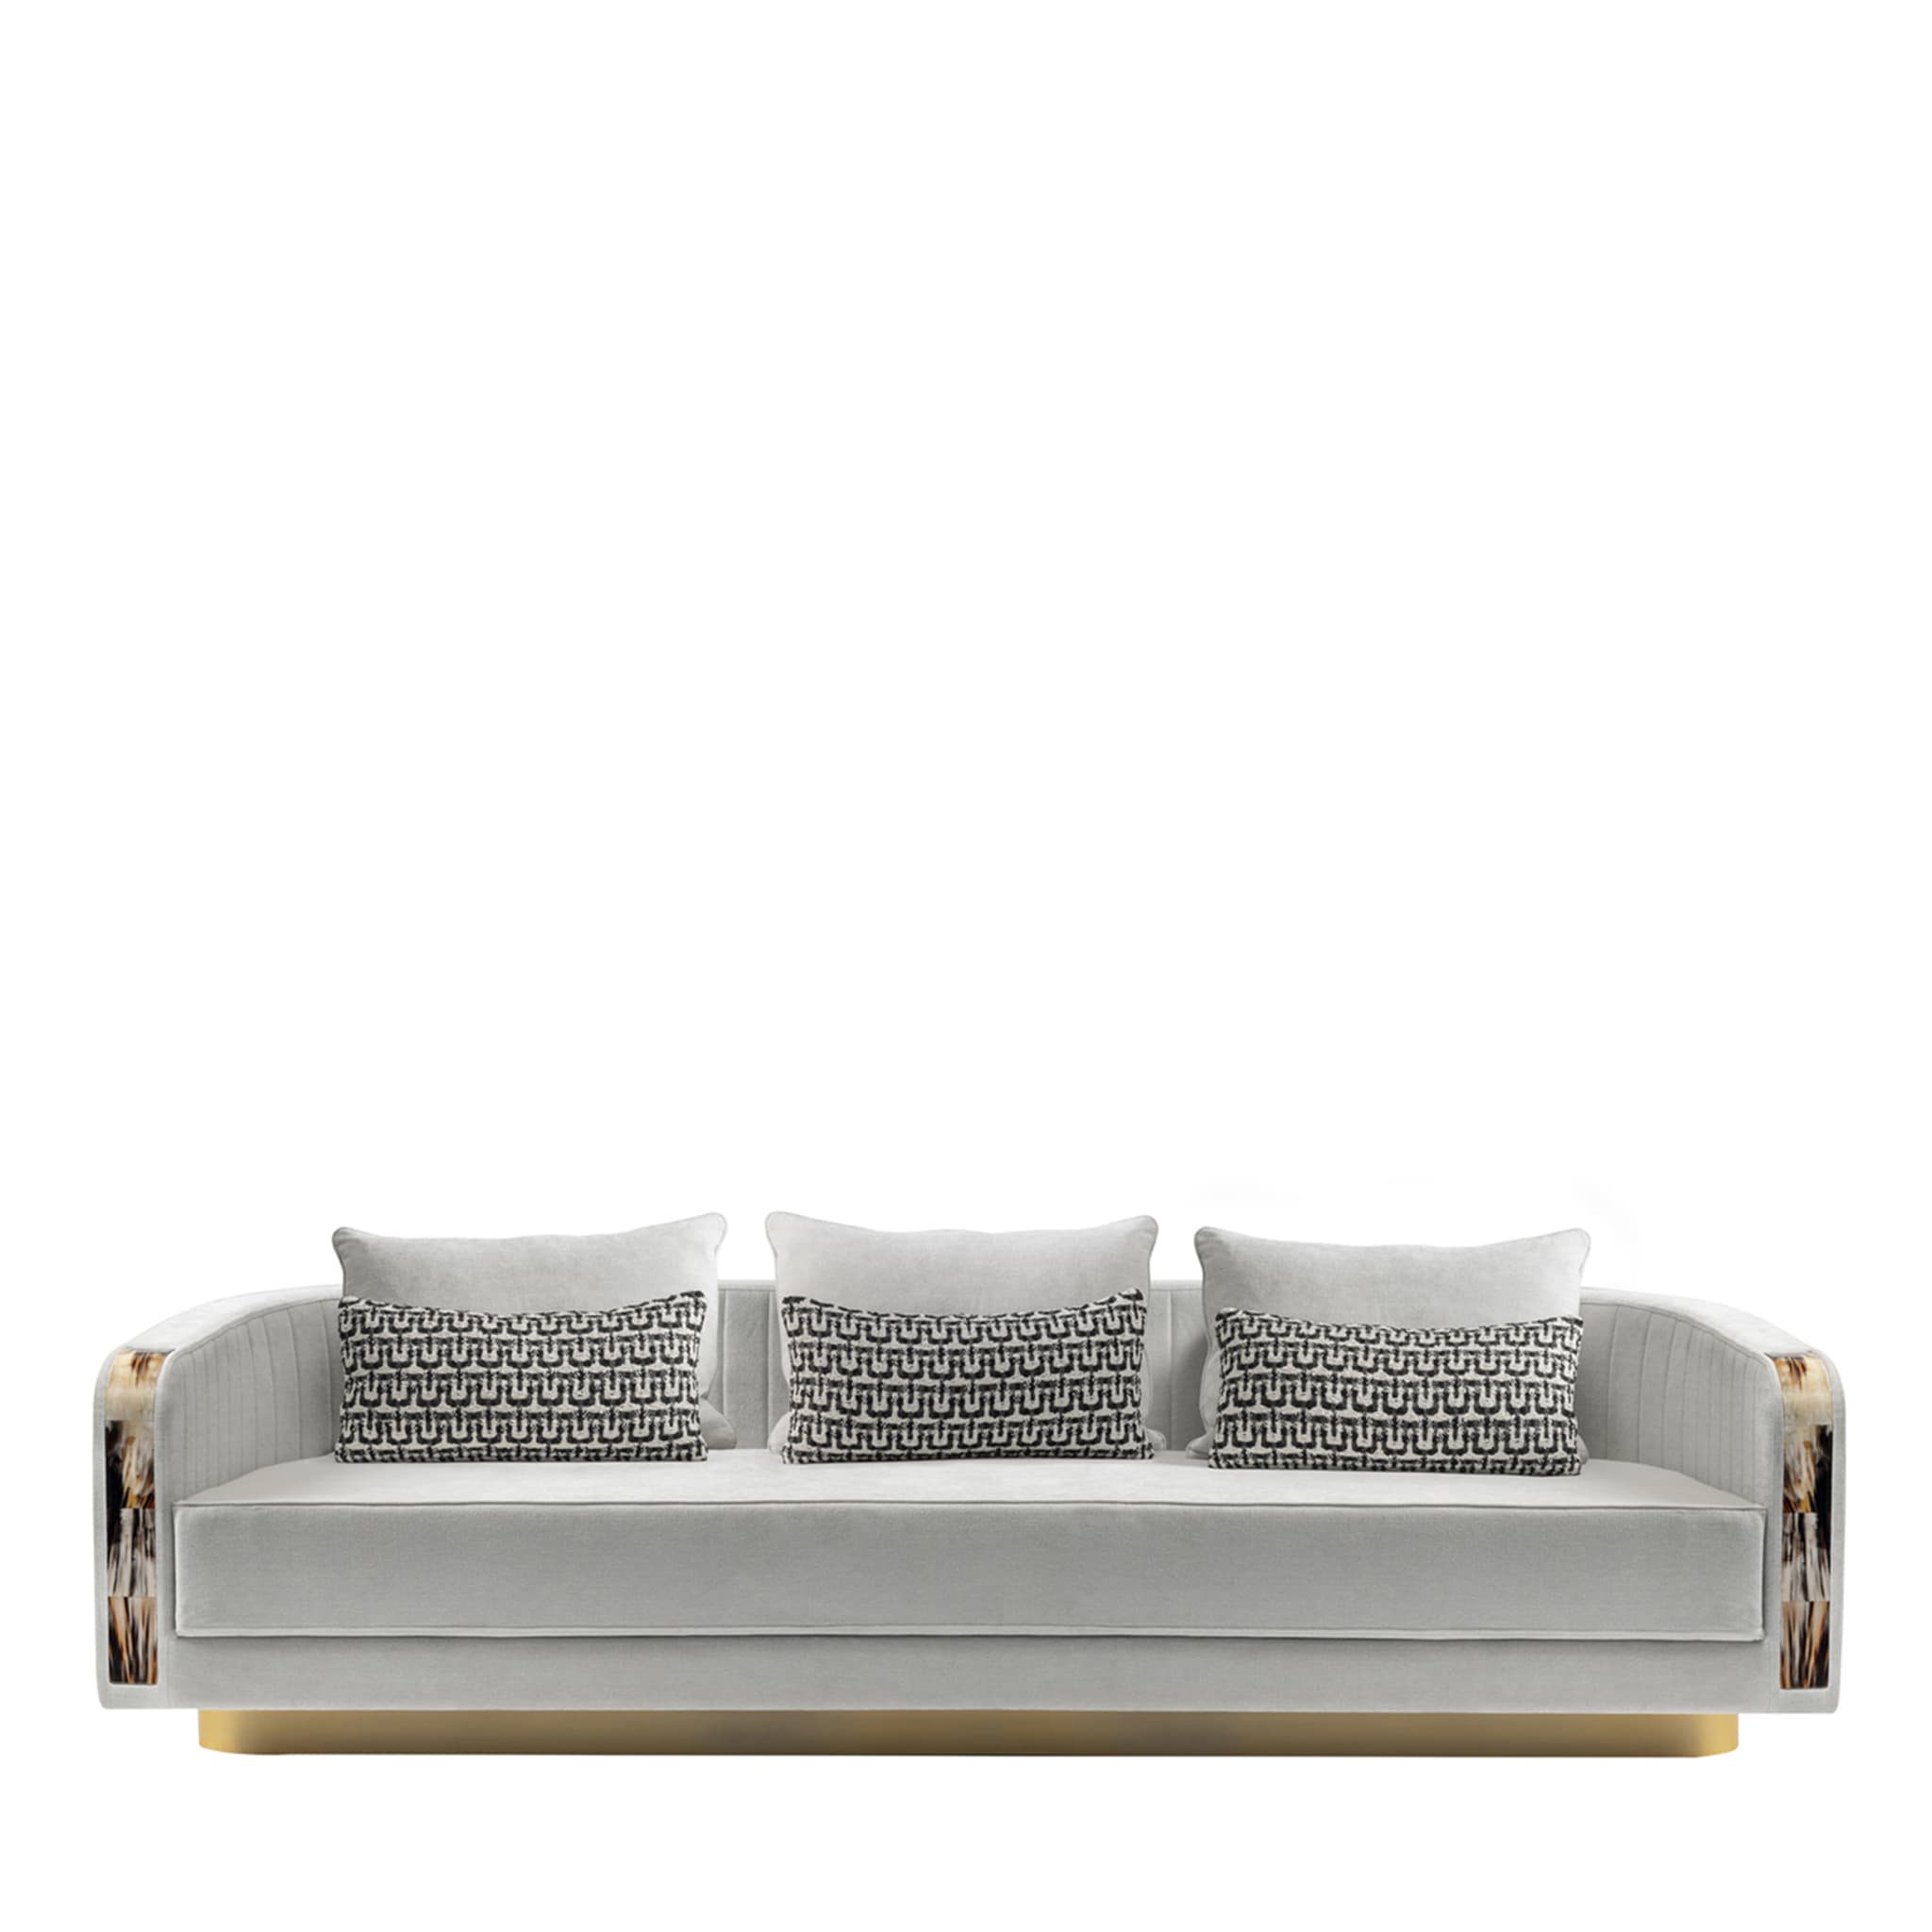 Afrodite 3-Seater Ivory Sofa with Horn Inlays - Main view